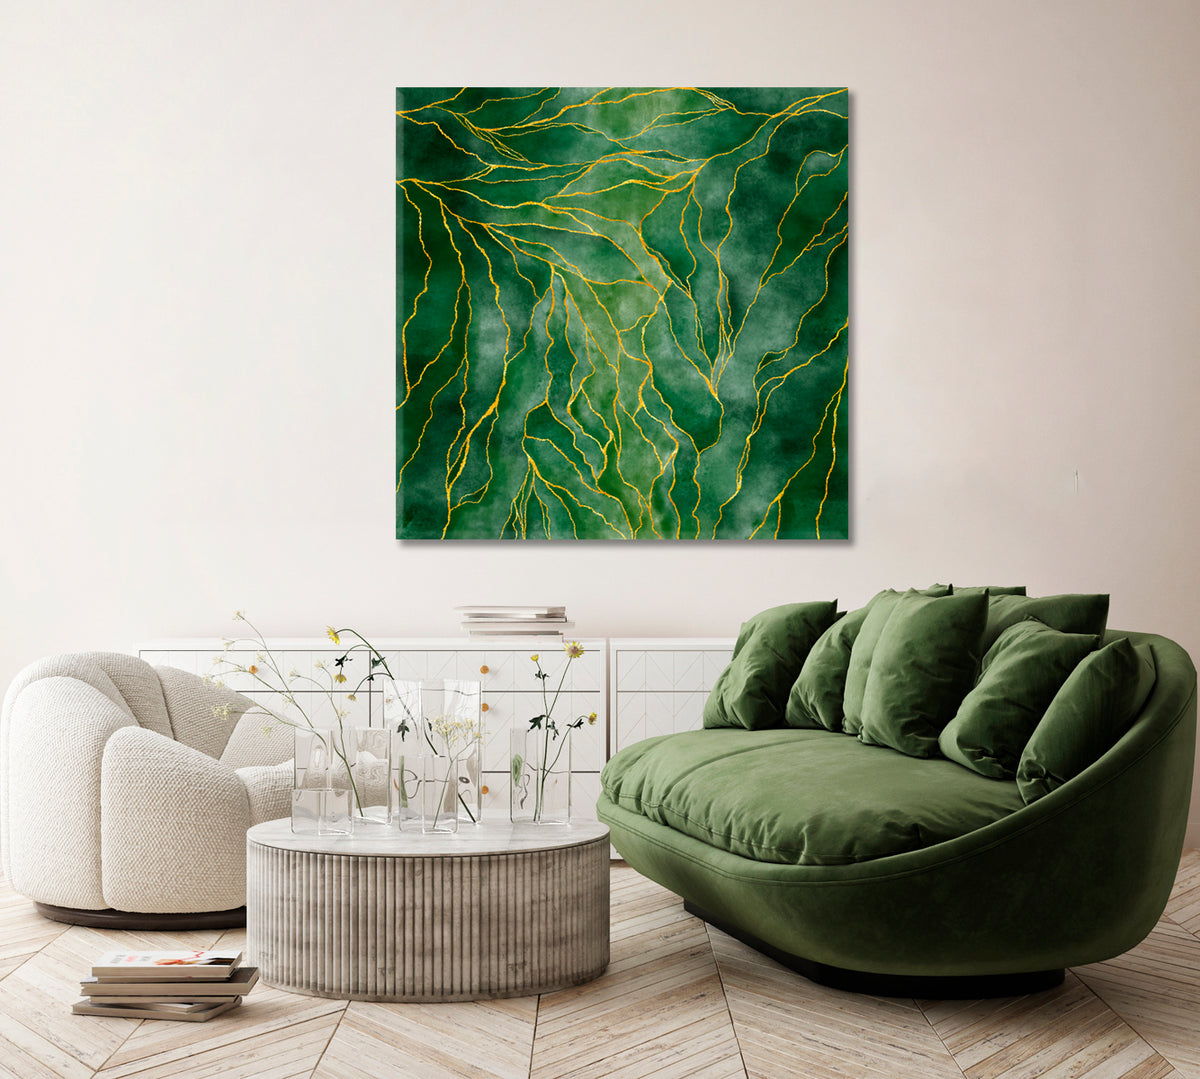 Elegant Green Marble with Golden Veins Canvas Print ArtLexy 1 Panel 12"x12" inches 